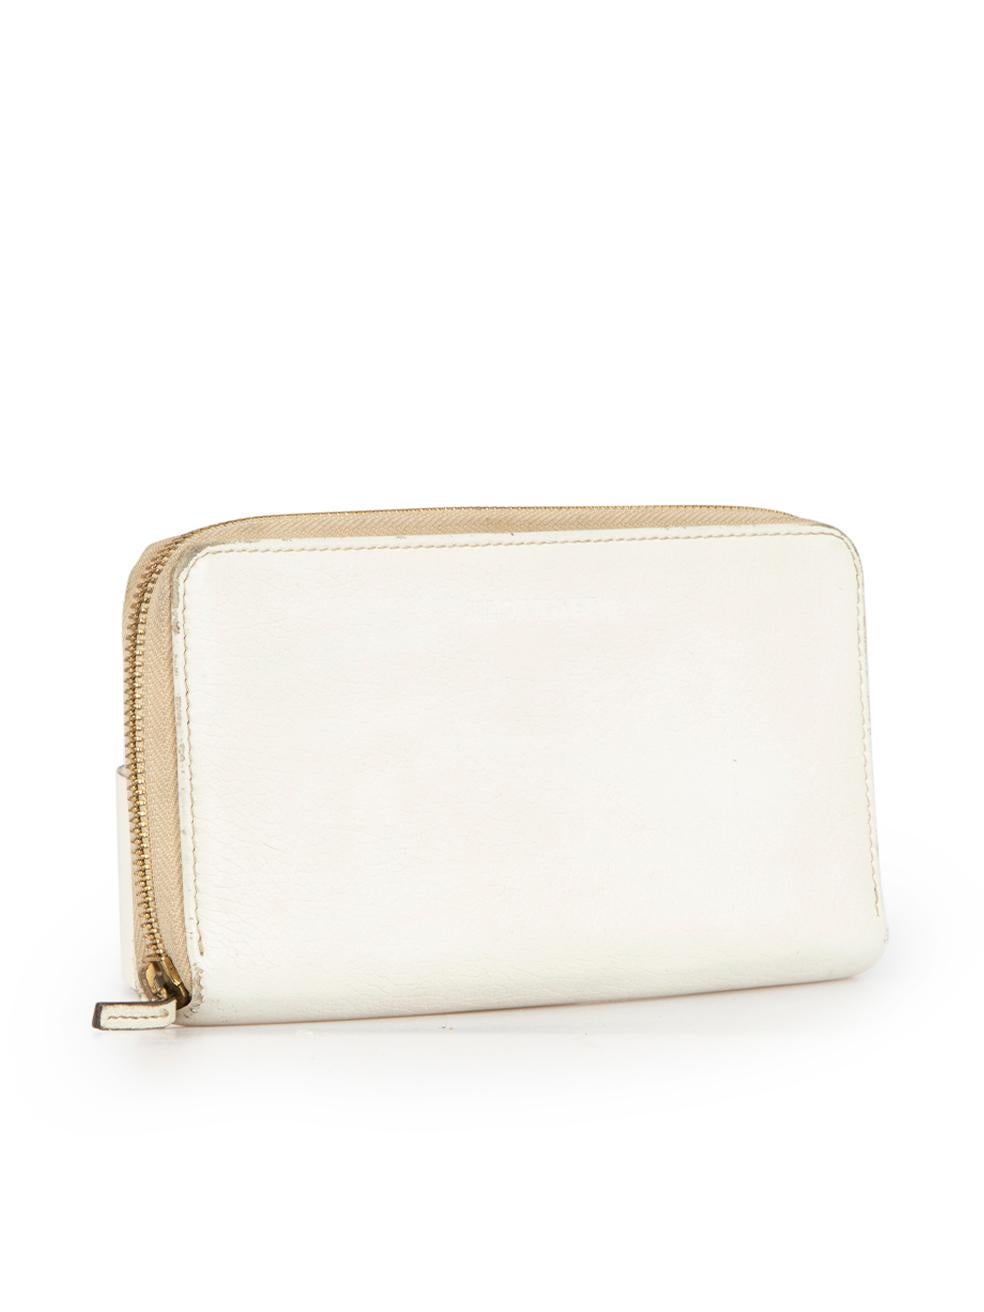 CONDITION is Good. General wear to purse is evident. Moderate signs of wear to the exterior with abrasions, scratches and marks to the leather on this used Jil Sander designer resale item.

Details
White
Leather
Wallet
Zip fastening
2x Main